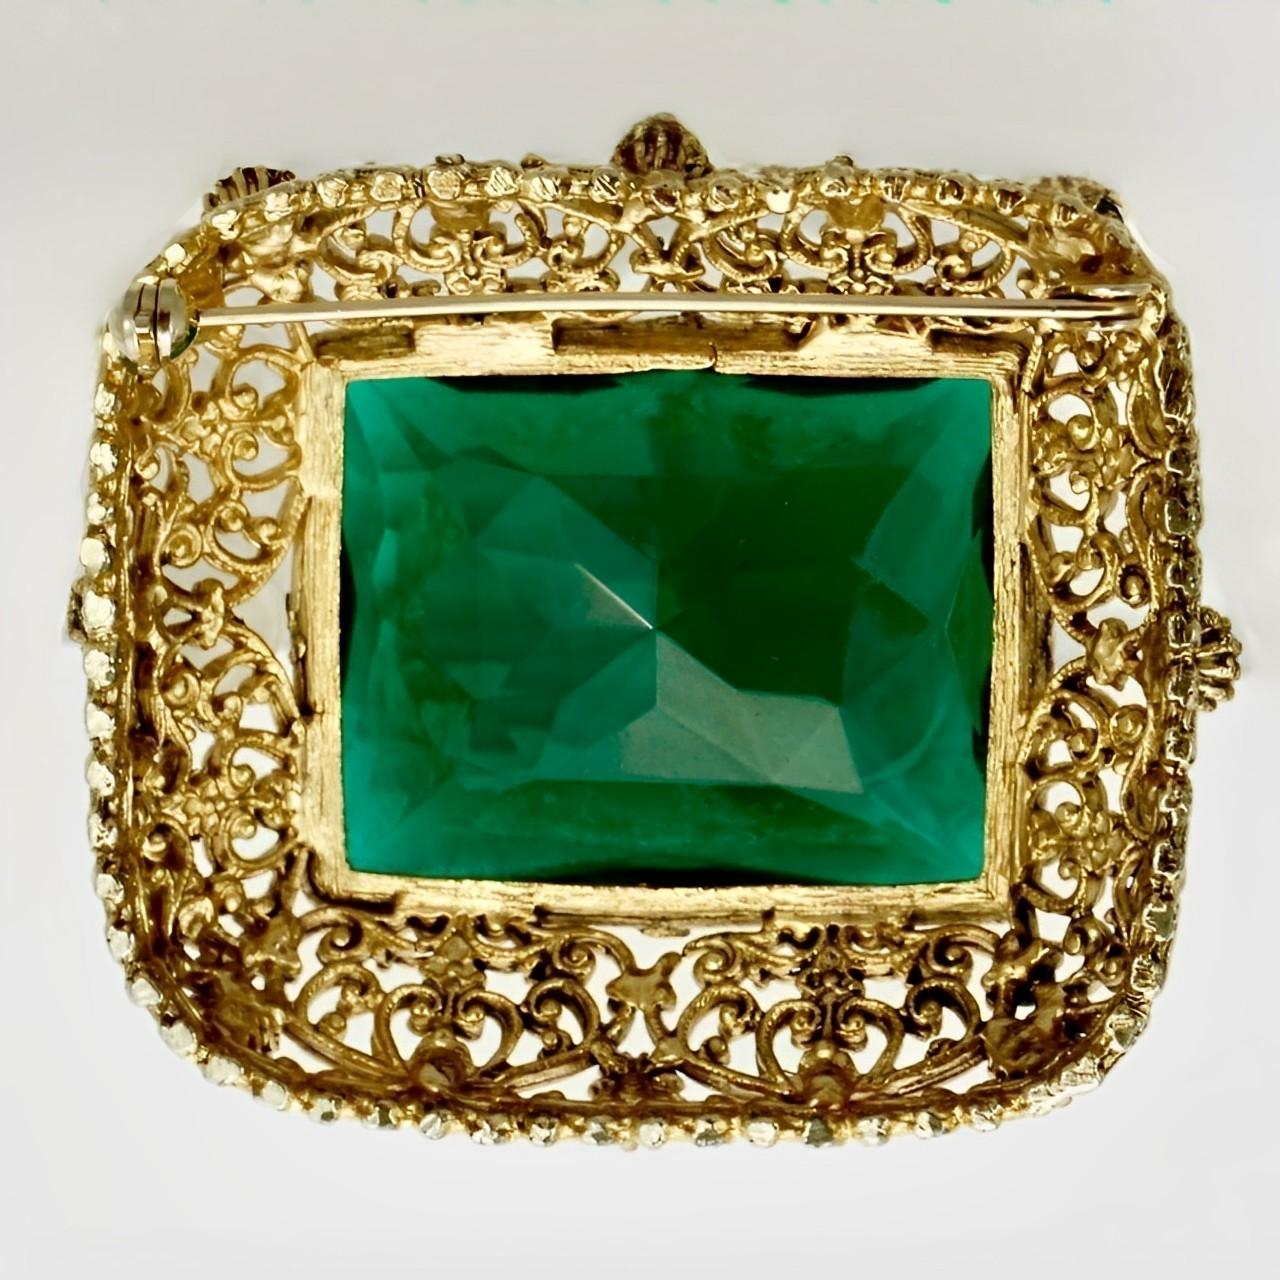 Gold plated filigree brooch featuring a large emerald green glass stone and eight green accent stones. Measuring length 5.4 cm / 2.1 inches by width 4.7 cm / 1.8 inch.

This is a beautiful and elegant statement brooch with emerald green glass